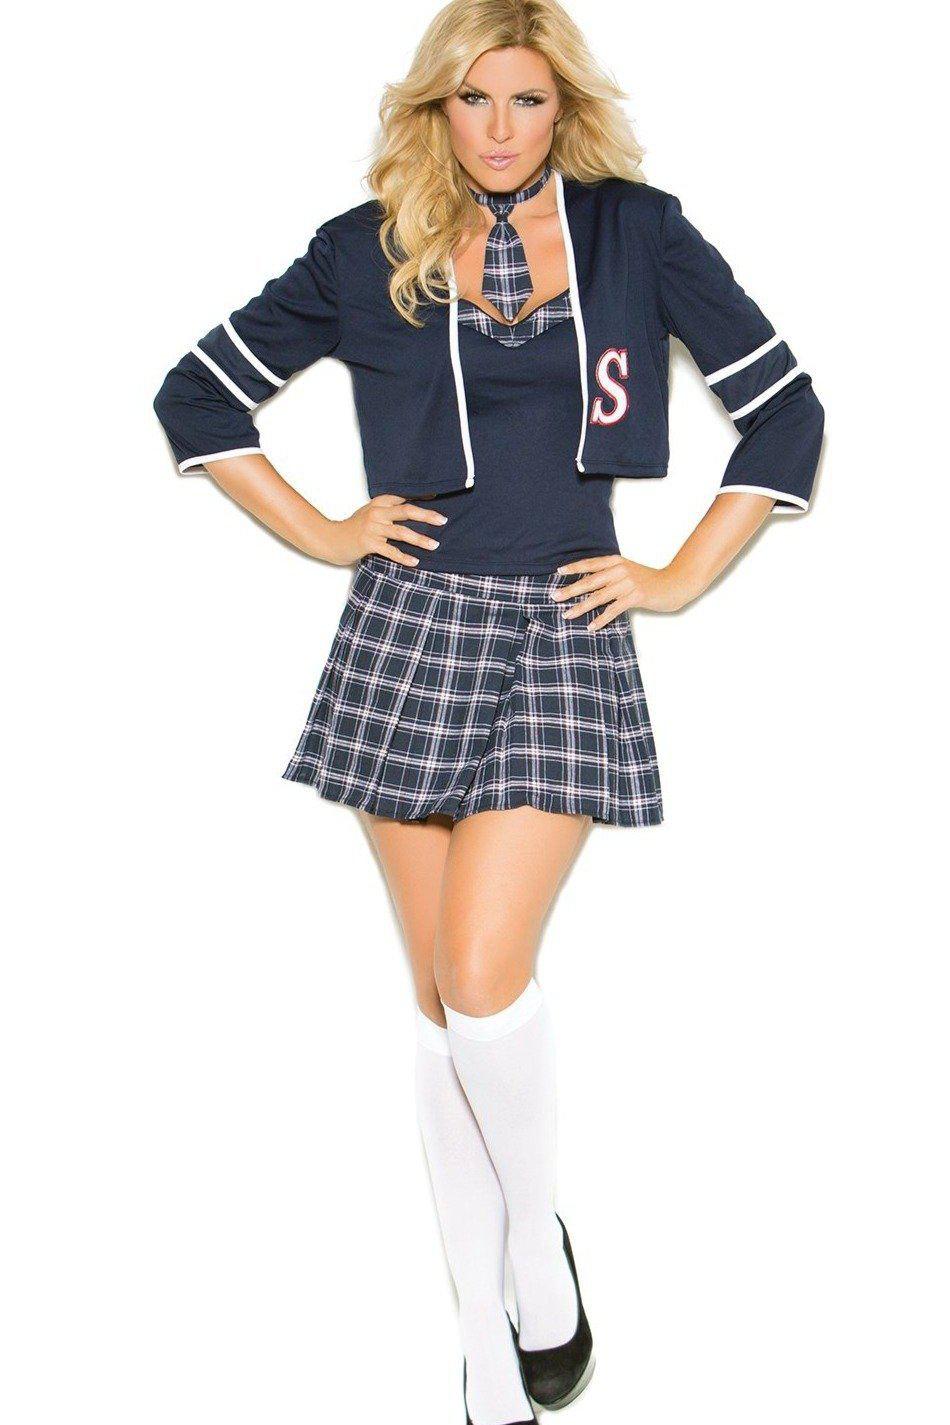 sexy school girl shoes